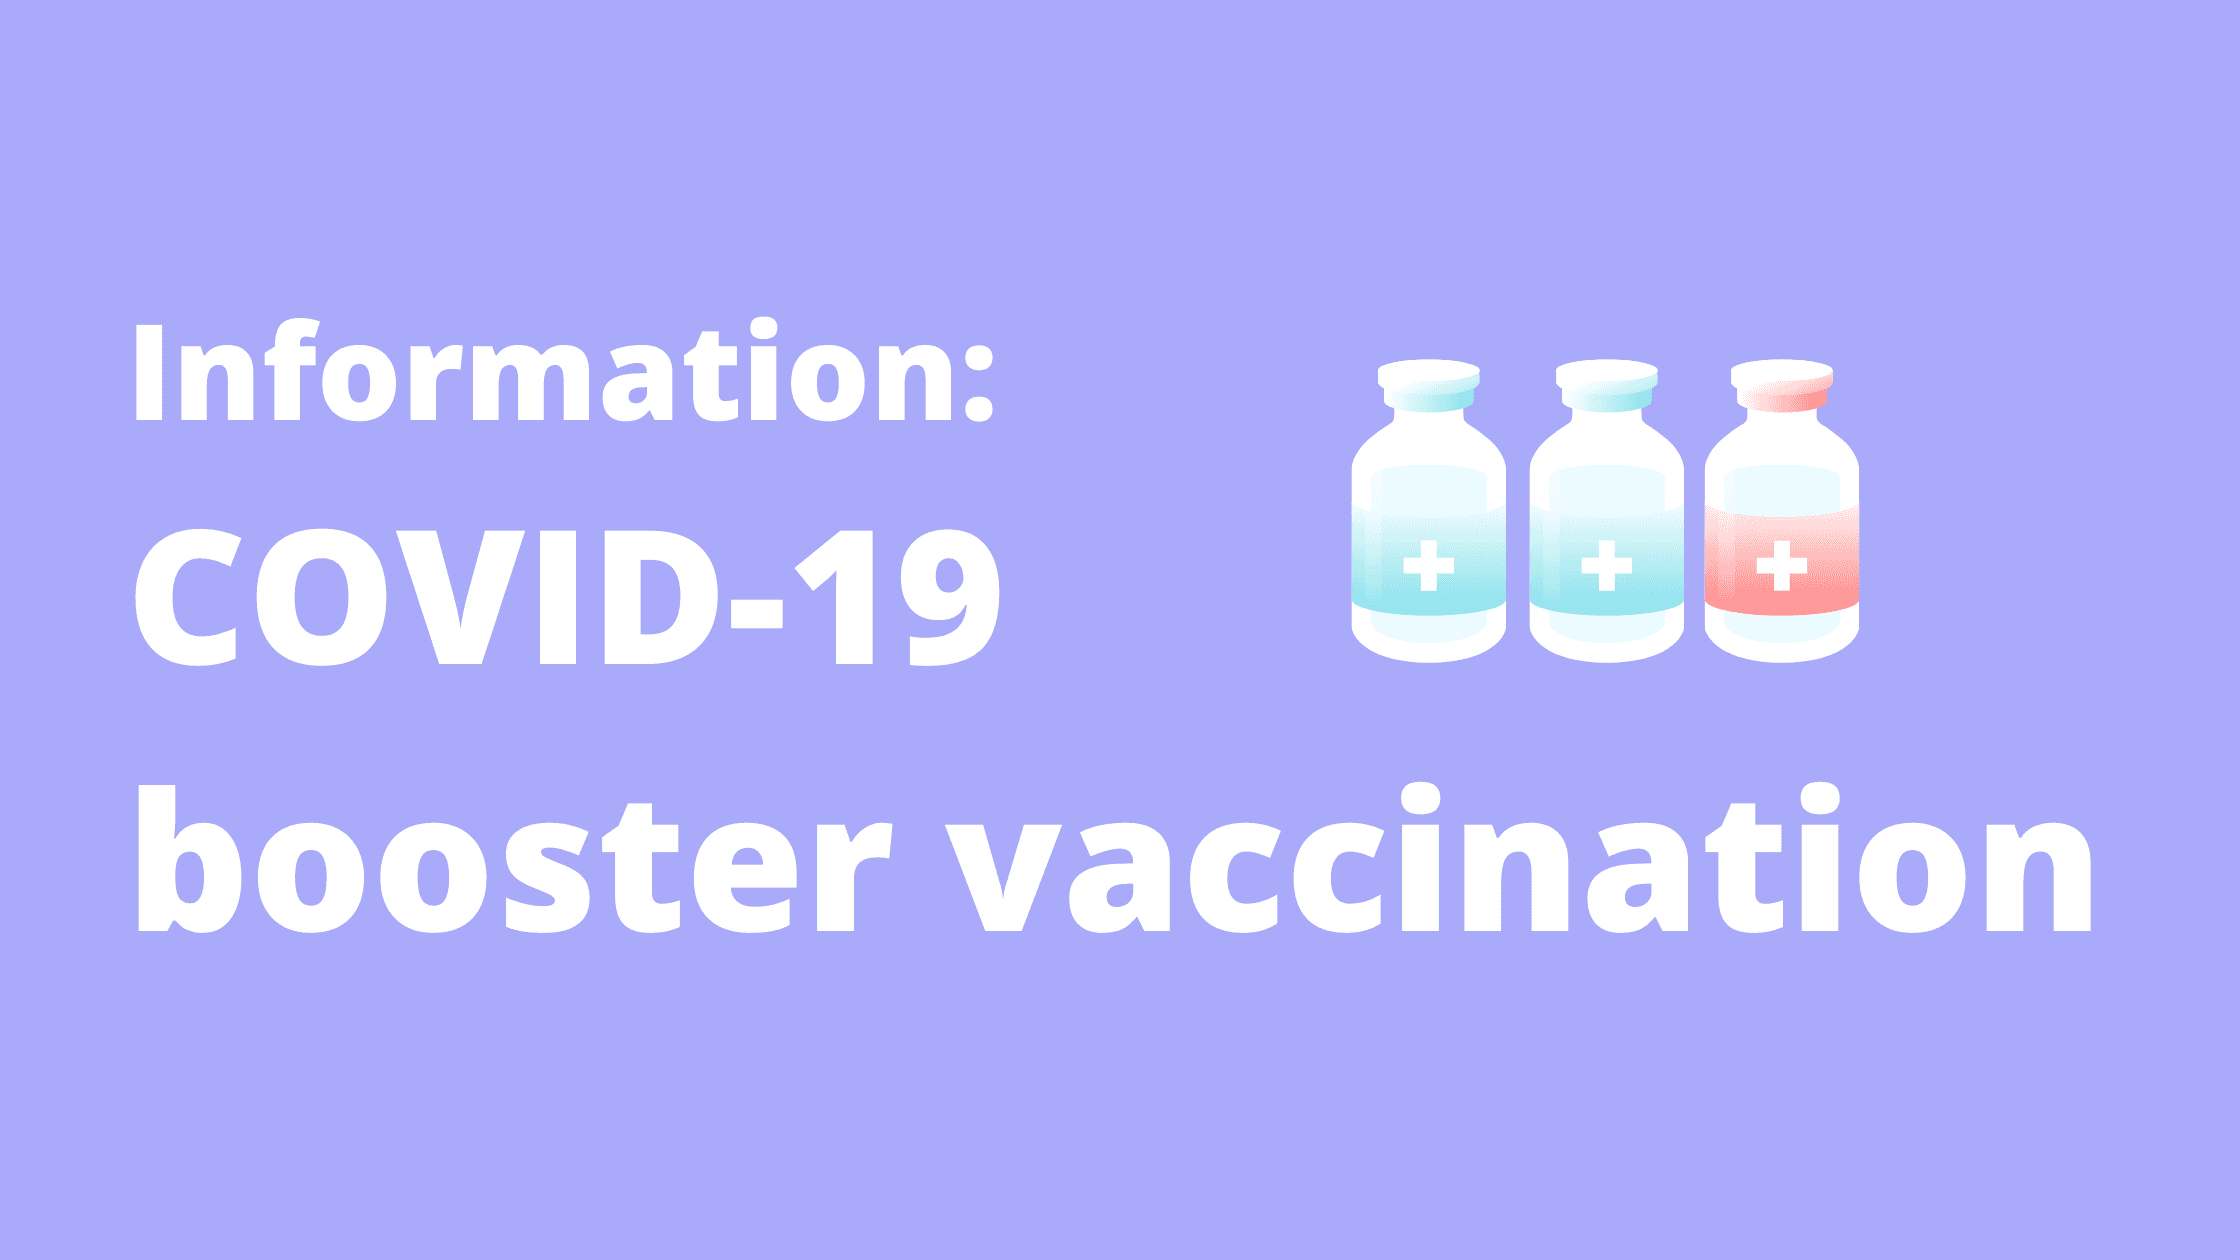 Information on booster vaccinations against COVID-19